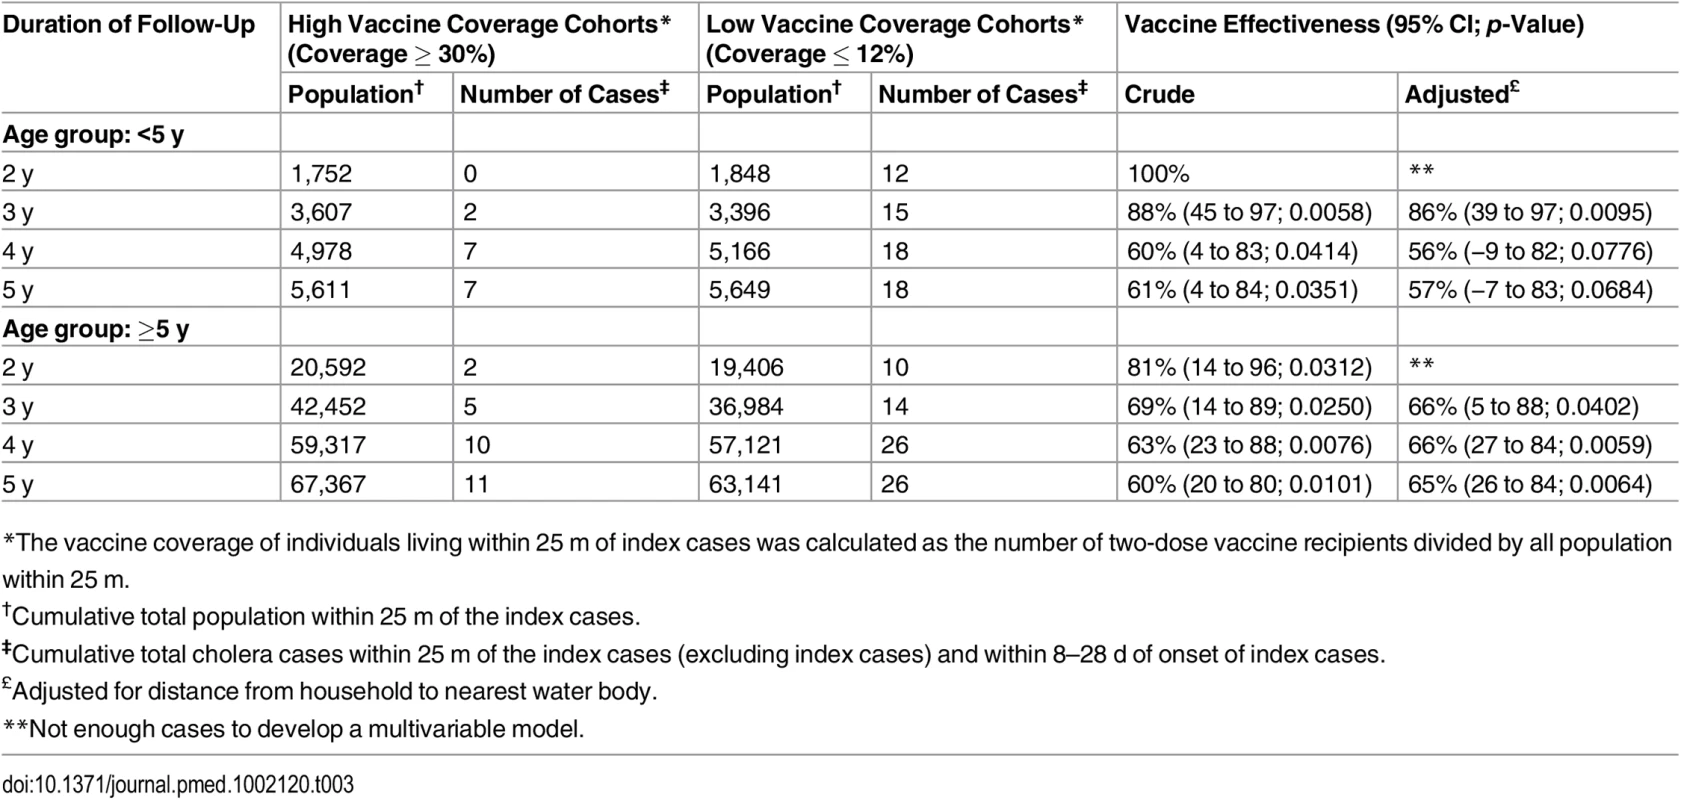 Overall vaccine effectiveness against cholera using ring vaccination strategy, by age group of the index case.